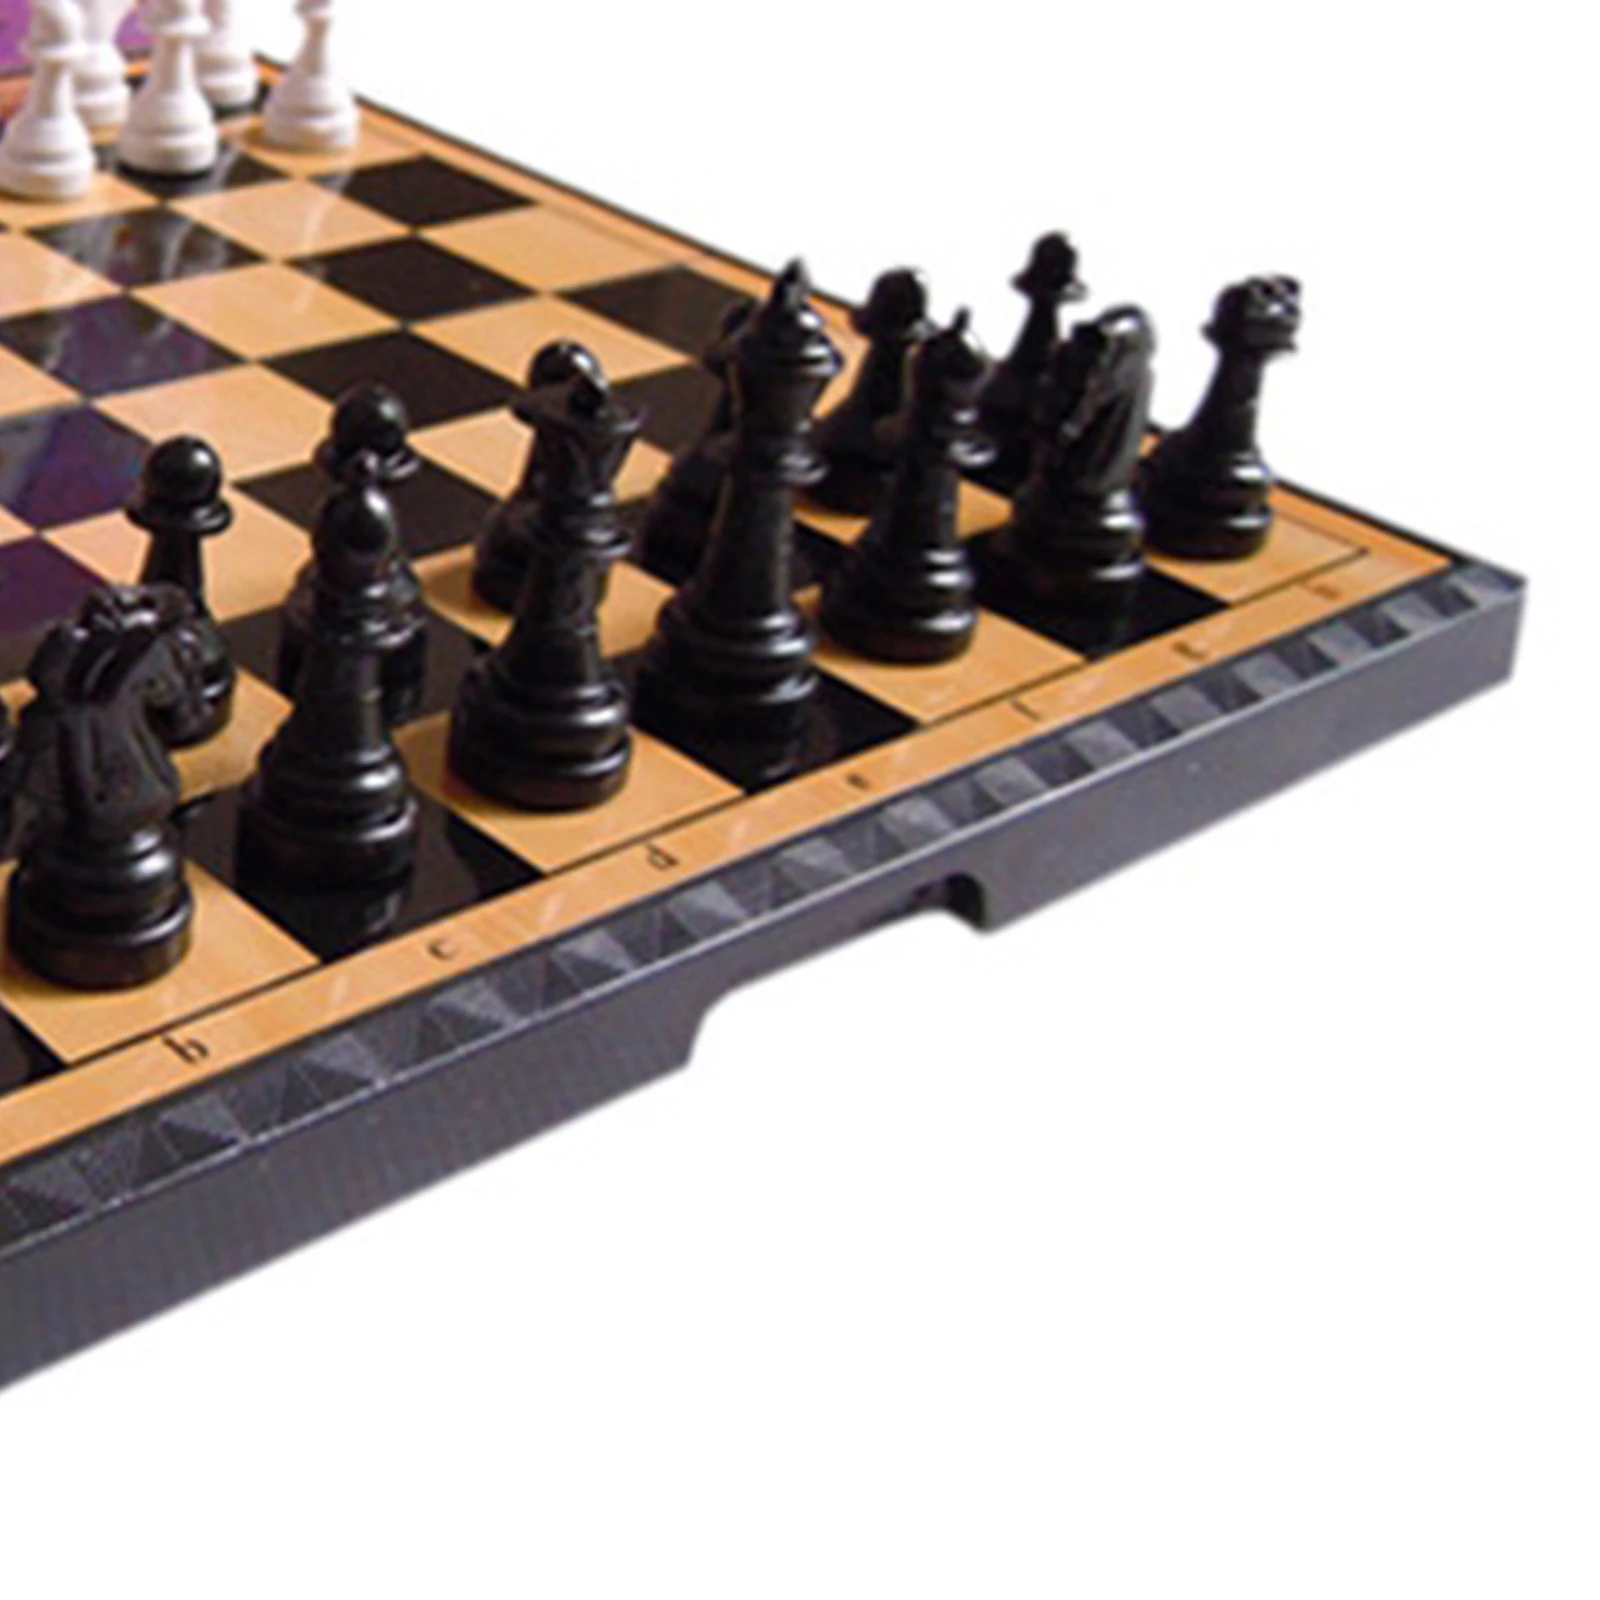 Travel Chess Set Chess Game 2 Players Entertainment Board Game Toys for Adult Kids